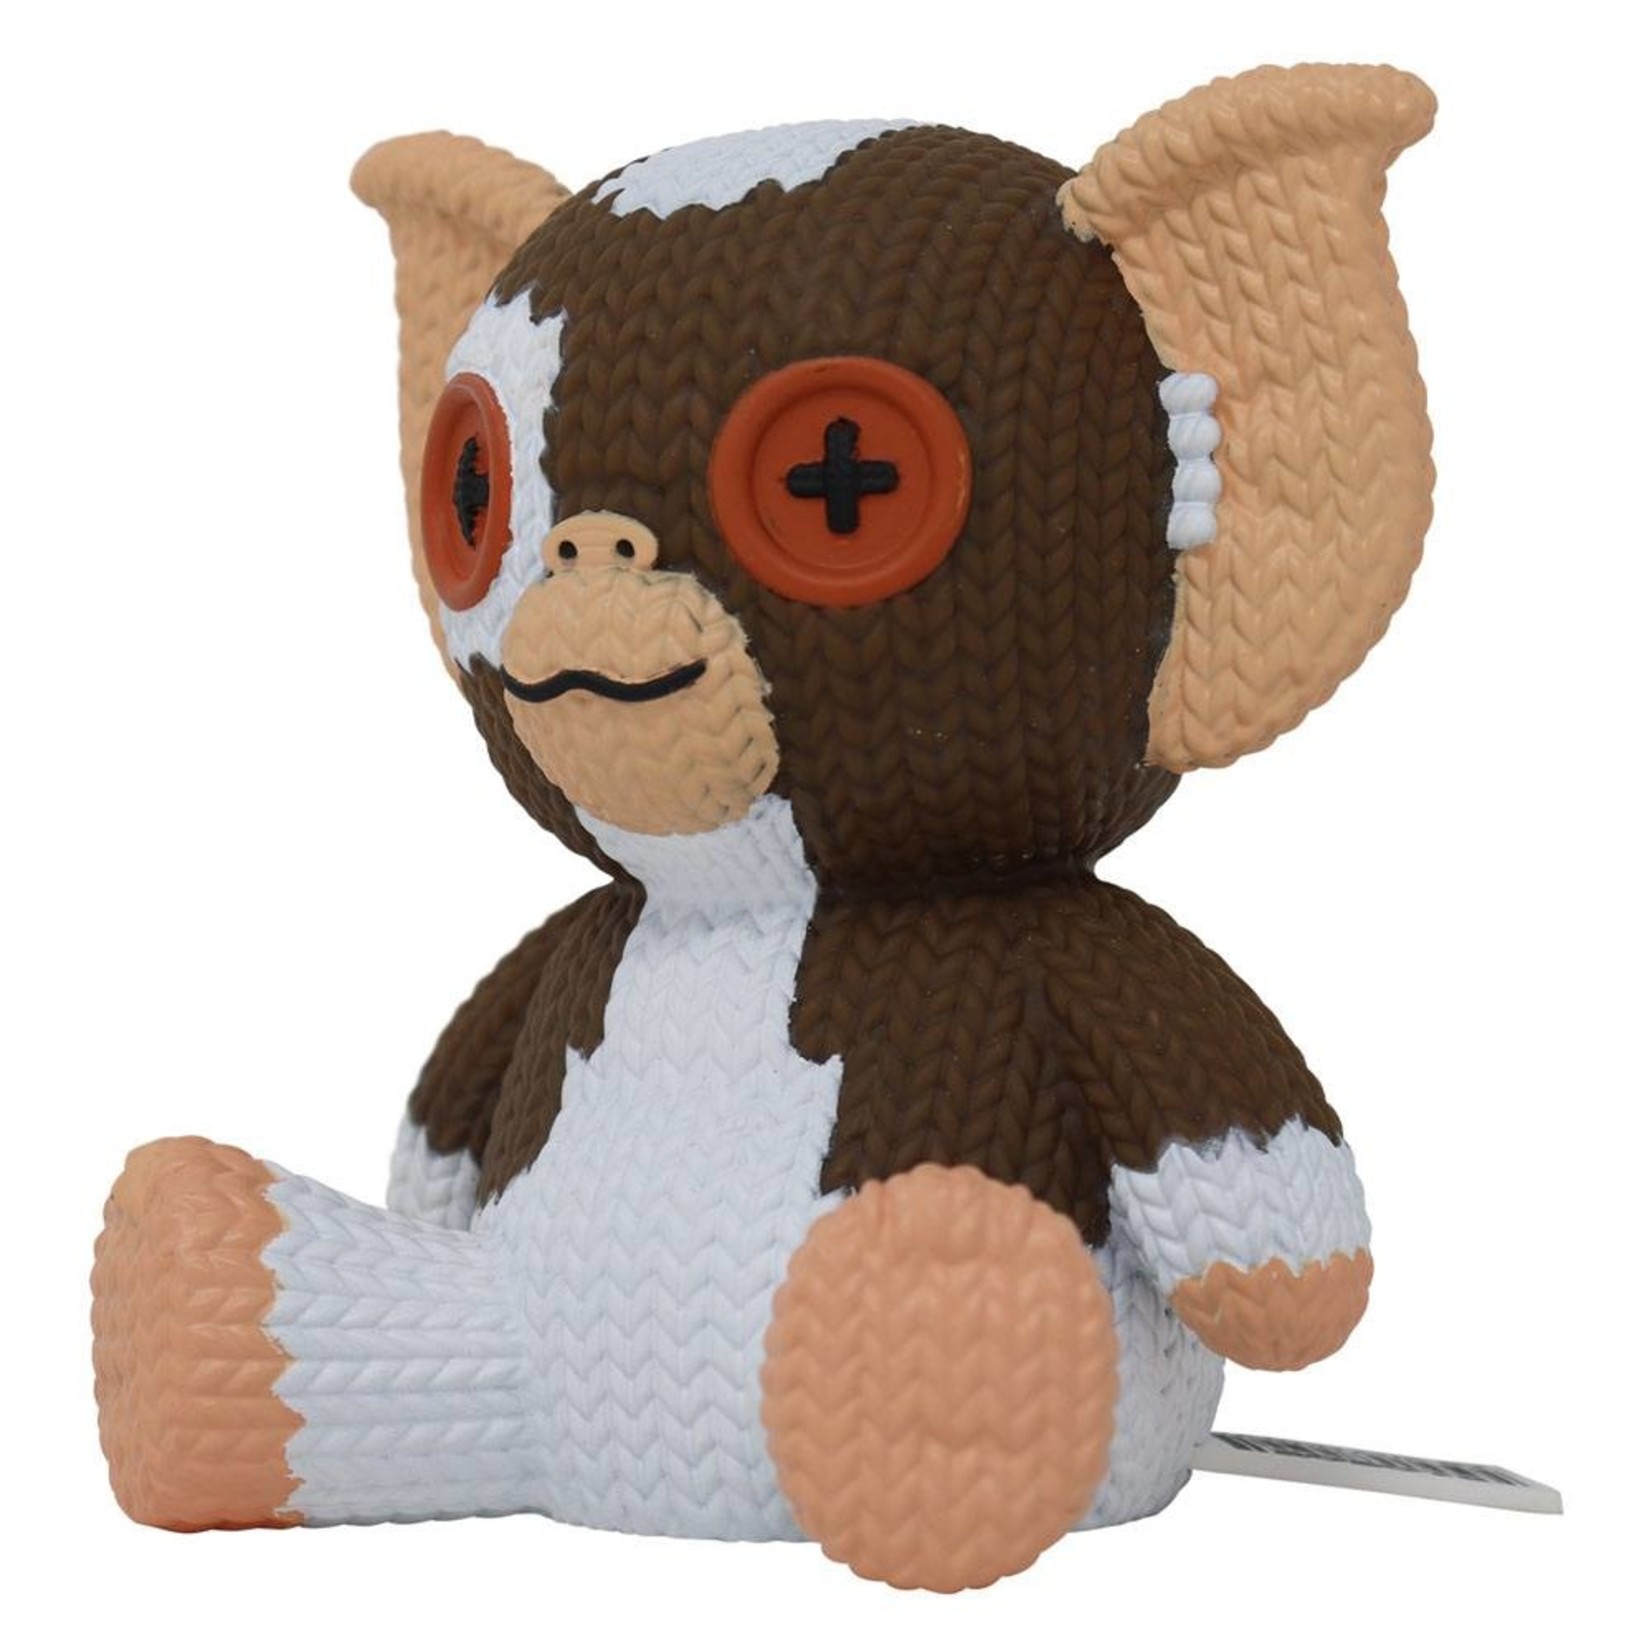 Handmade by Robots Handmade by Robots Gremlins Gizmo Collectible Vinyl Figure